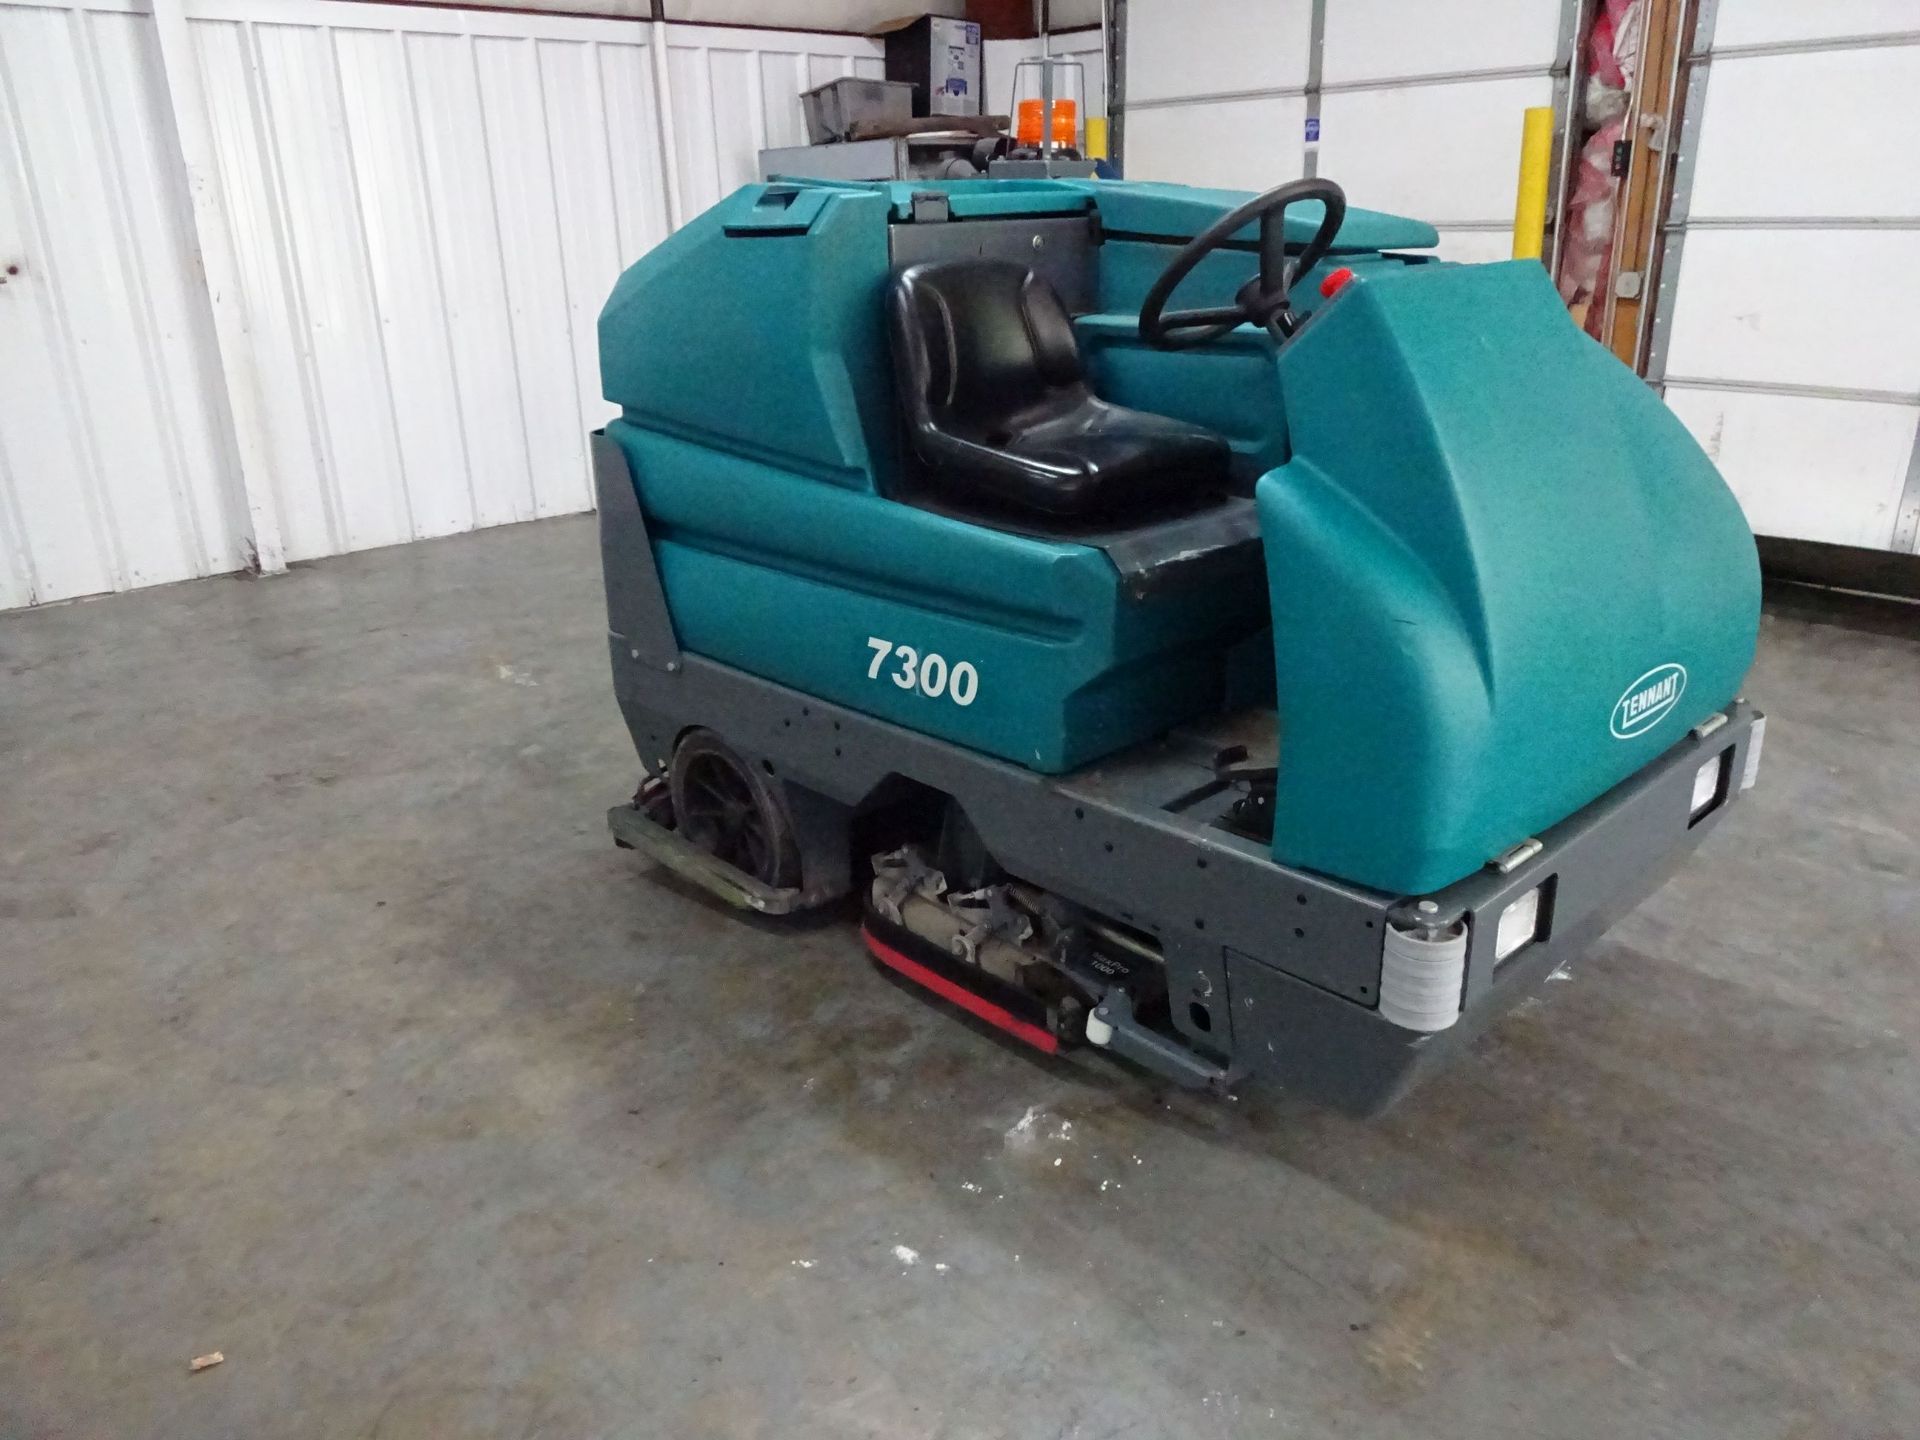 TENNANT MODEL 7300 ELECTRIC SIT DOWN FLOOR SCRUBBER; S/N 7300-5076 (695 HOURS), W/ 36-VOLT CHARGER - - Image 3 of 13